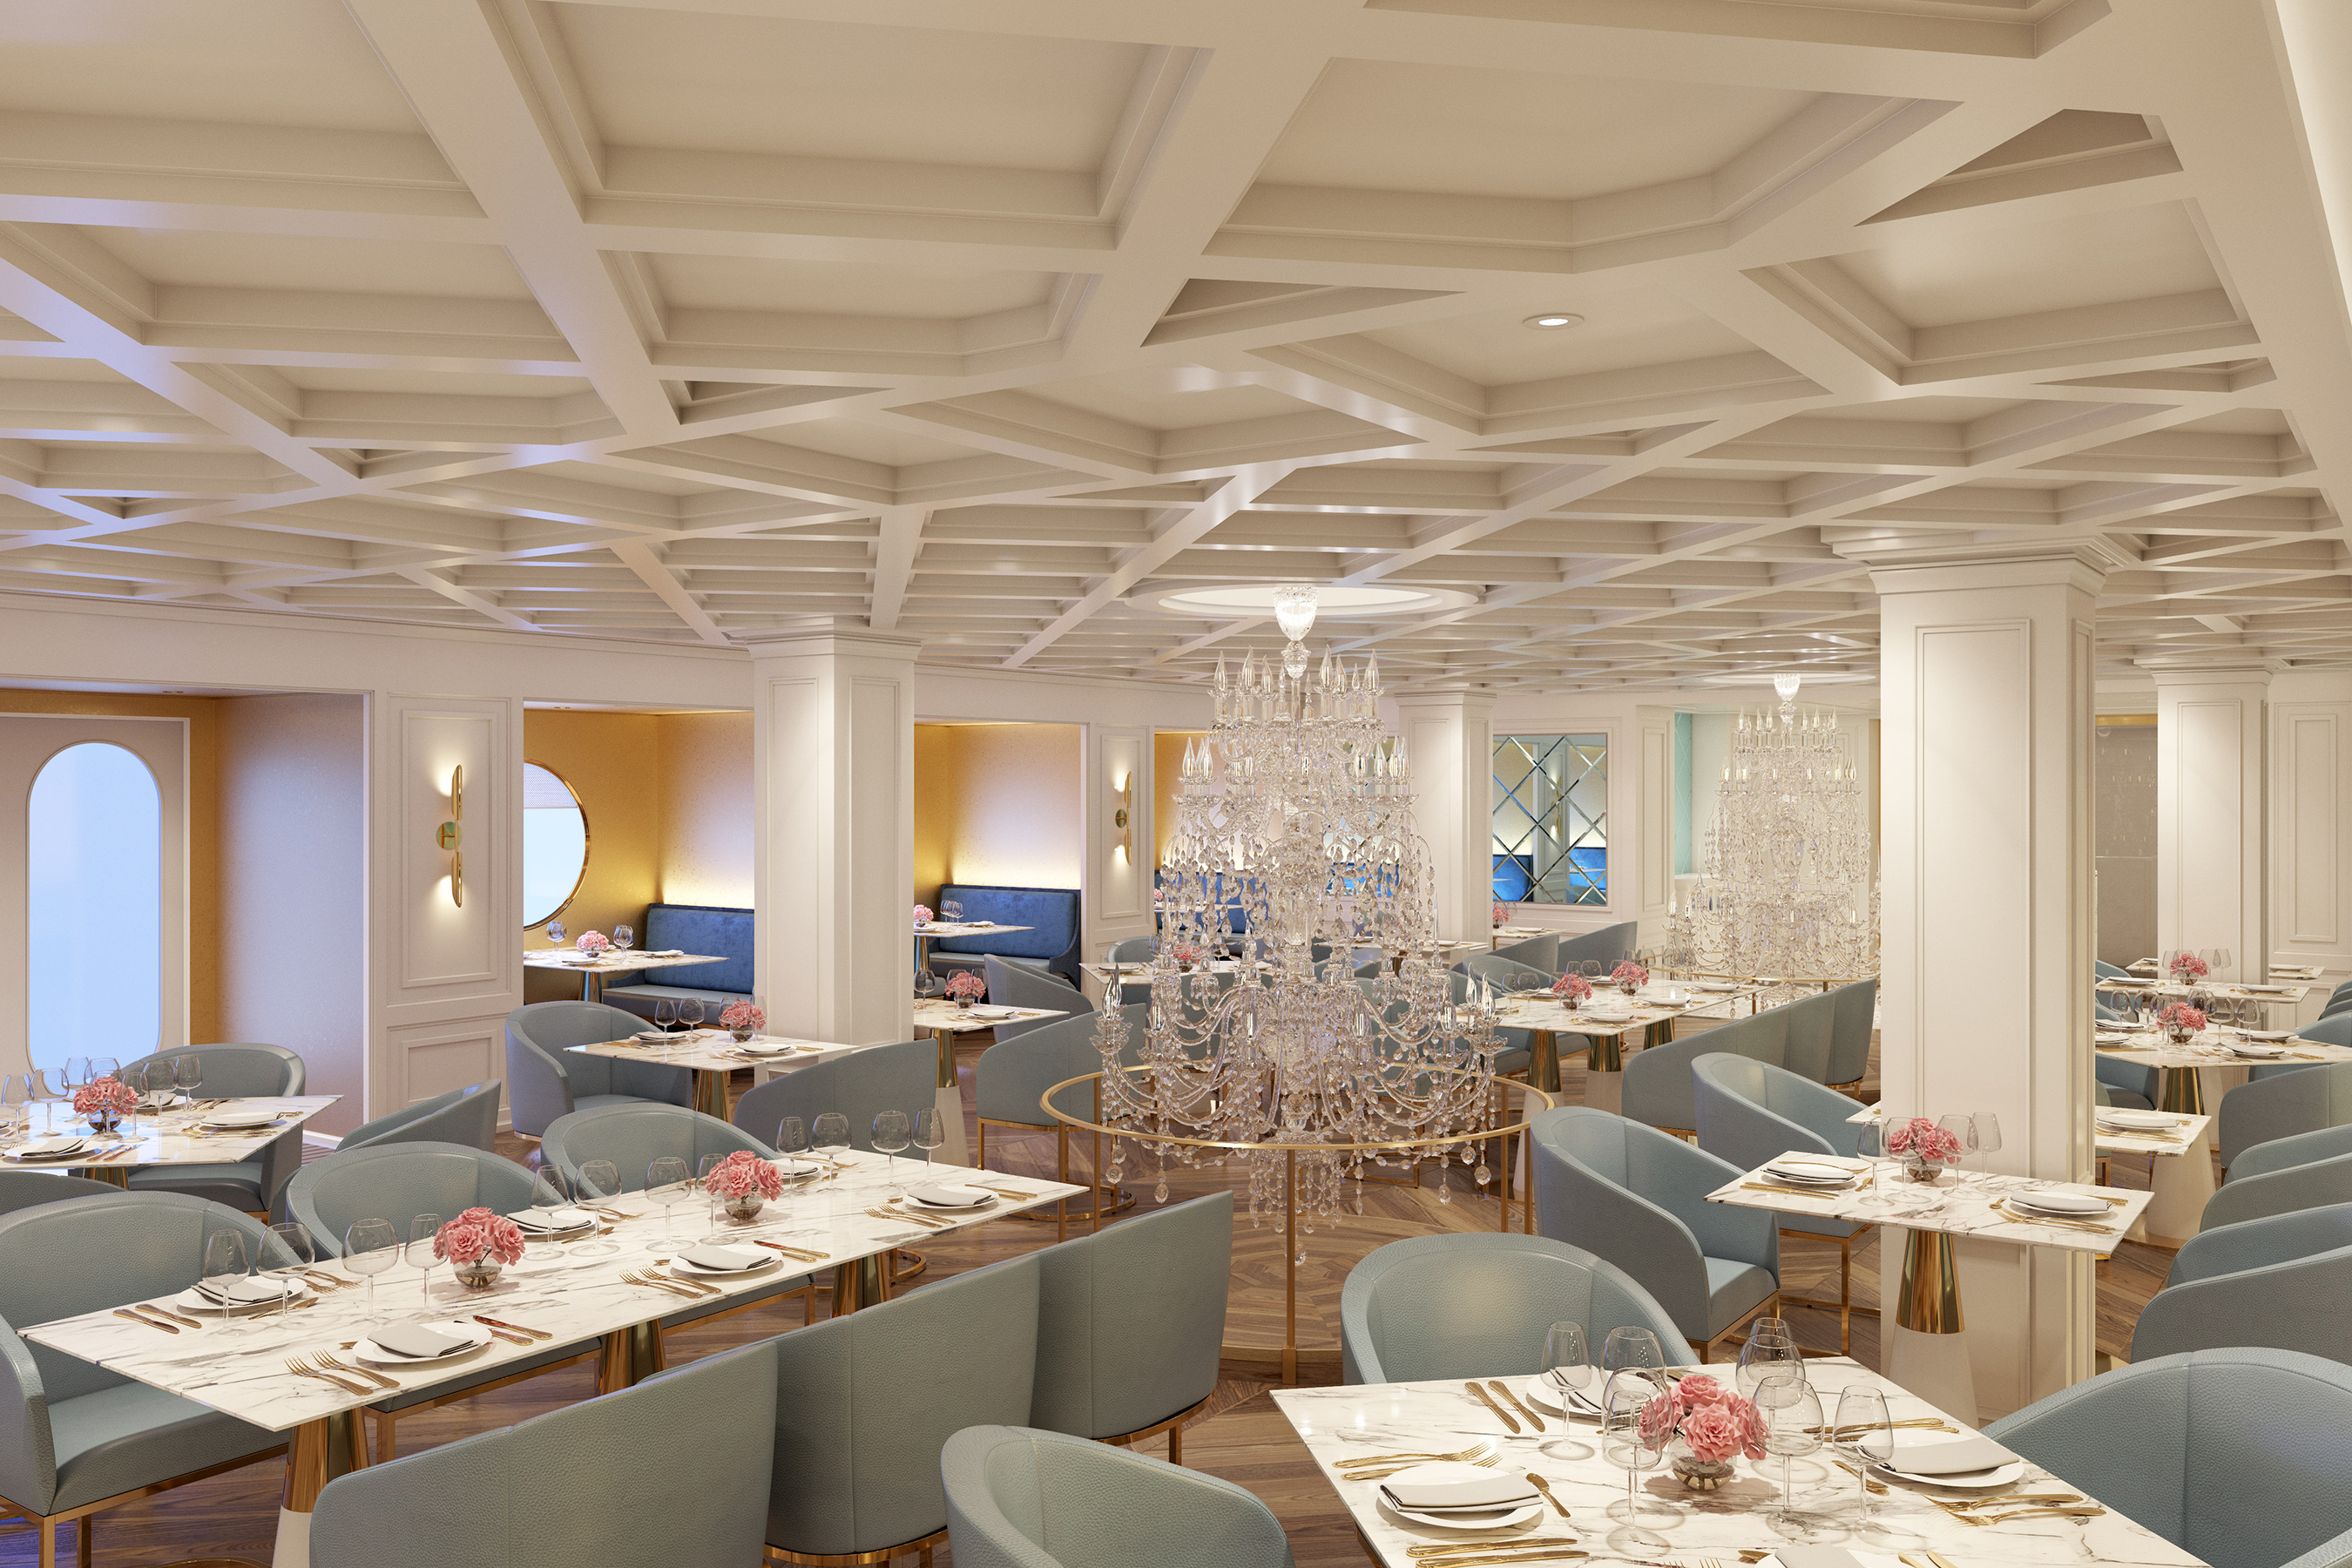 Guest-favorite eateries will make a return on Norwegian Prima and Viva, including Le Bistro, the French specialty restaurant. The space captures the French flair of the Palace of Mirrors in Versailles and will showcase sophisticated décor boasting three floor-to-ceiling chandeliers, coffered ceilings and plaster moldings.